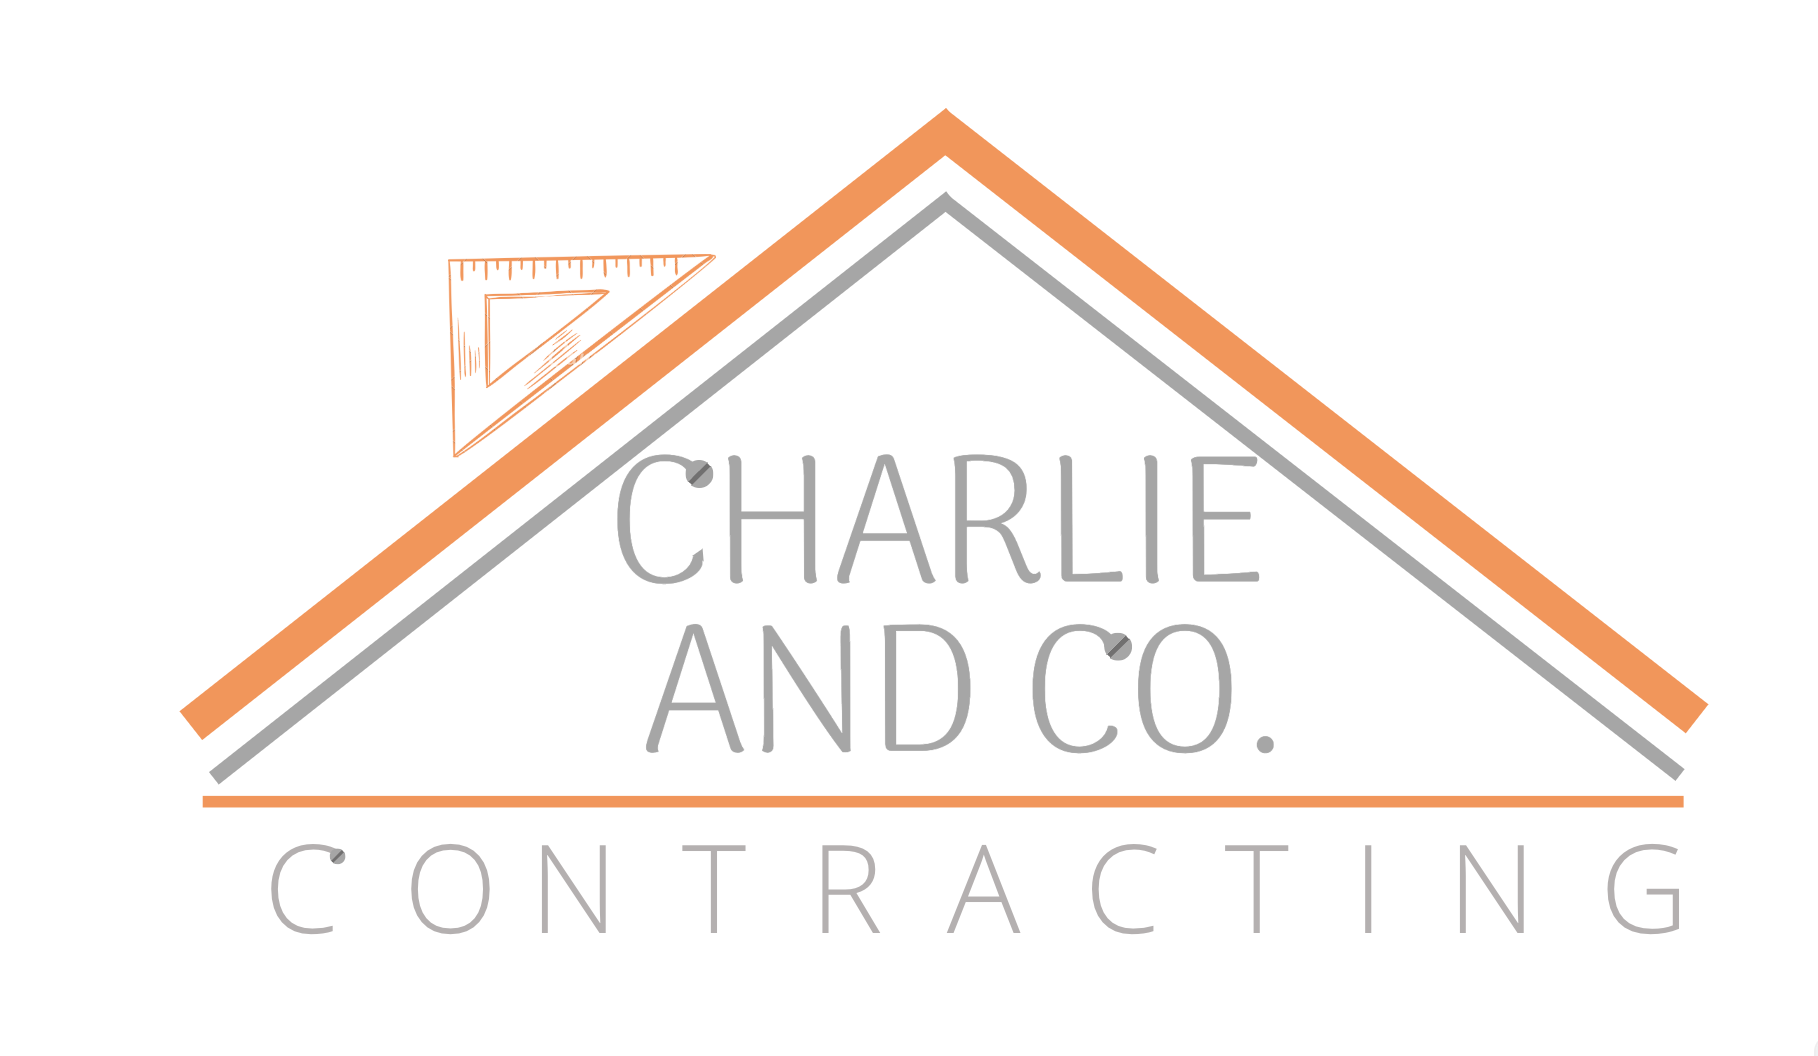 Charlie and Co. Contracting